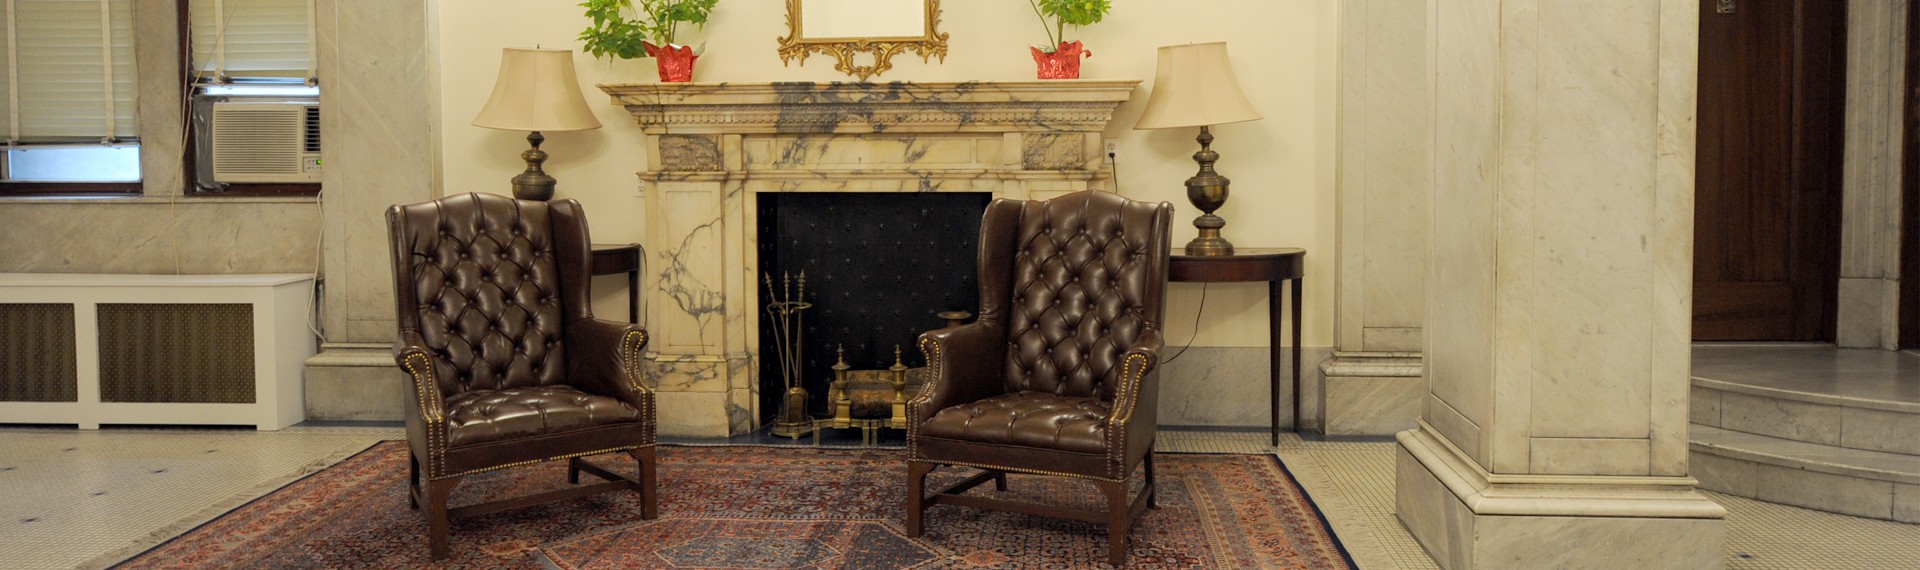 Lobby inside of 423 W. 120th Street with a decorative fireplace and furniture 